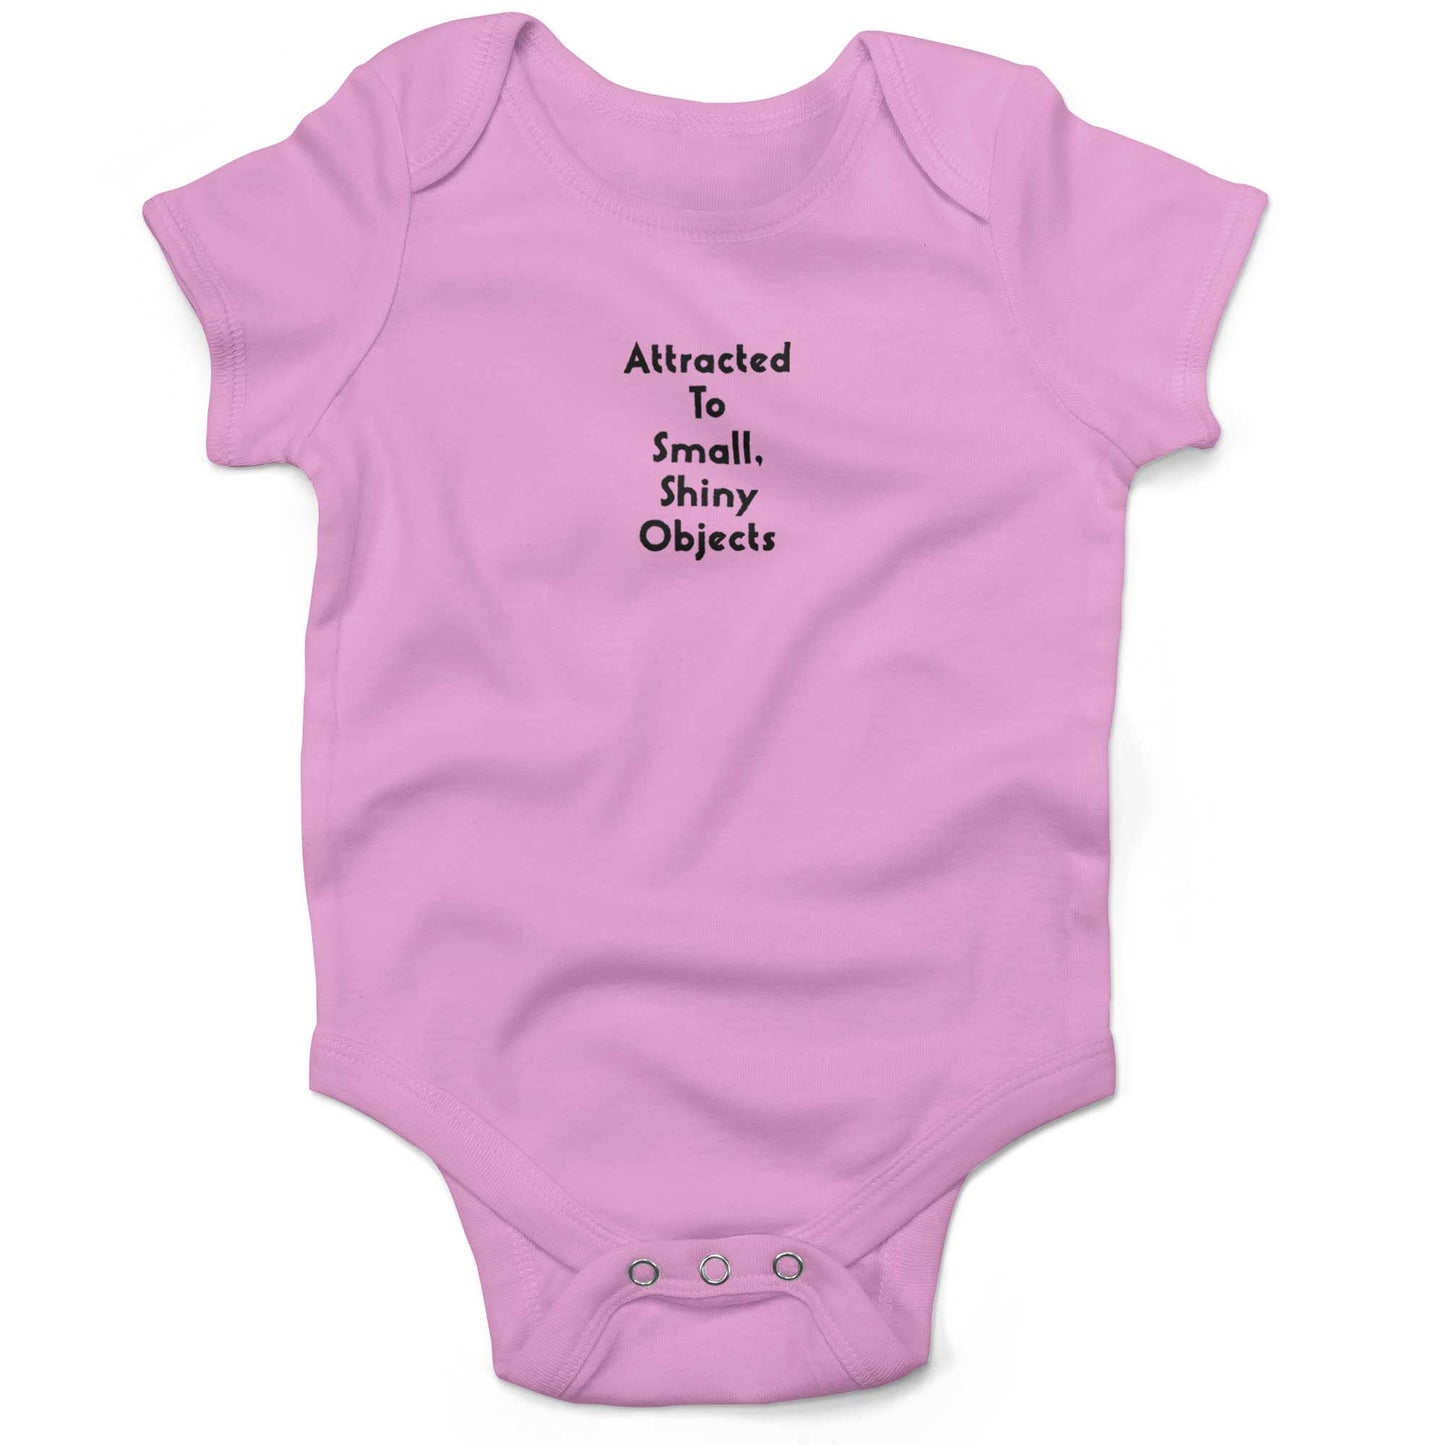 Attracted To Small, Shiny Objects Baby One Piece-Organic Pink-3-6 months